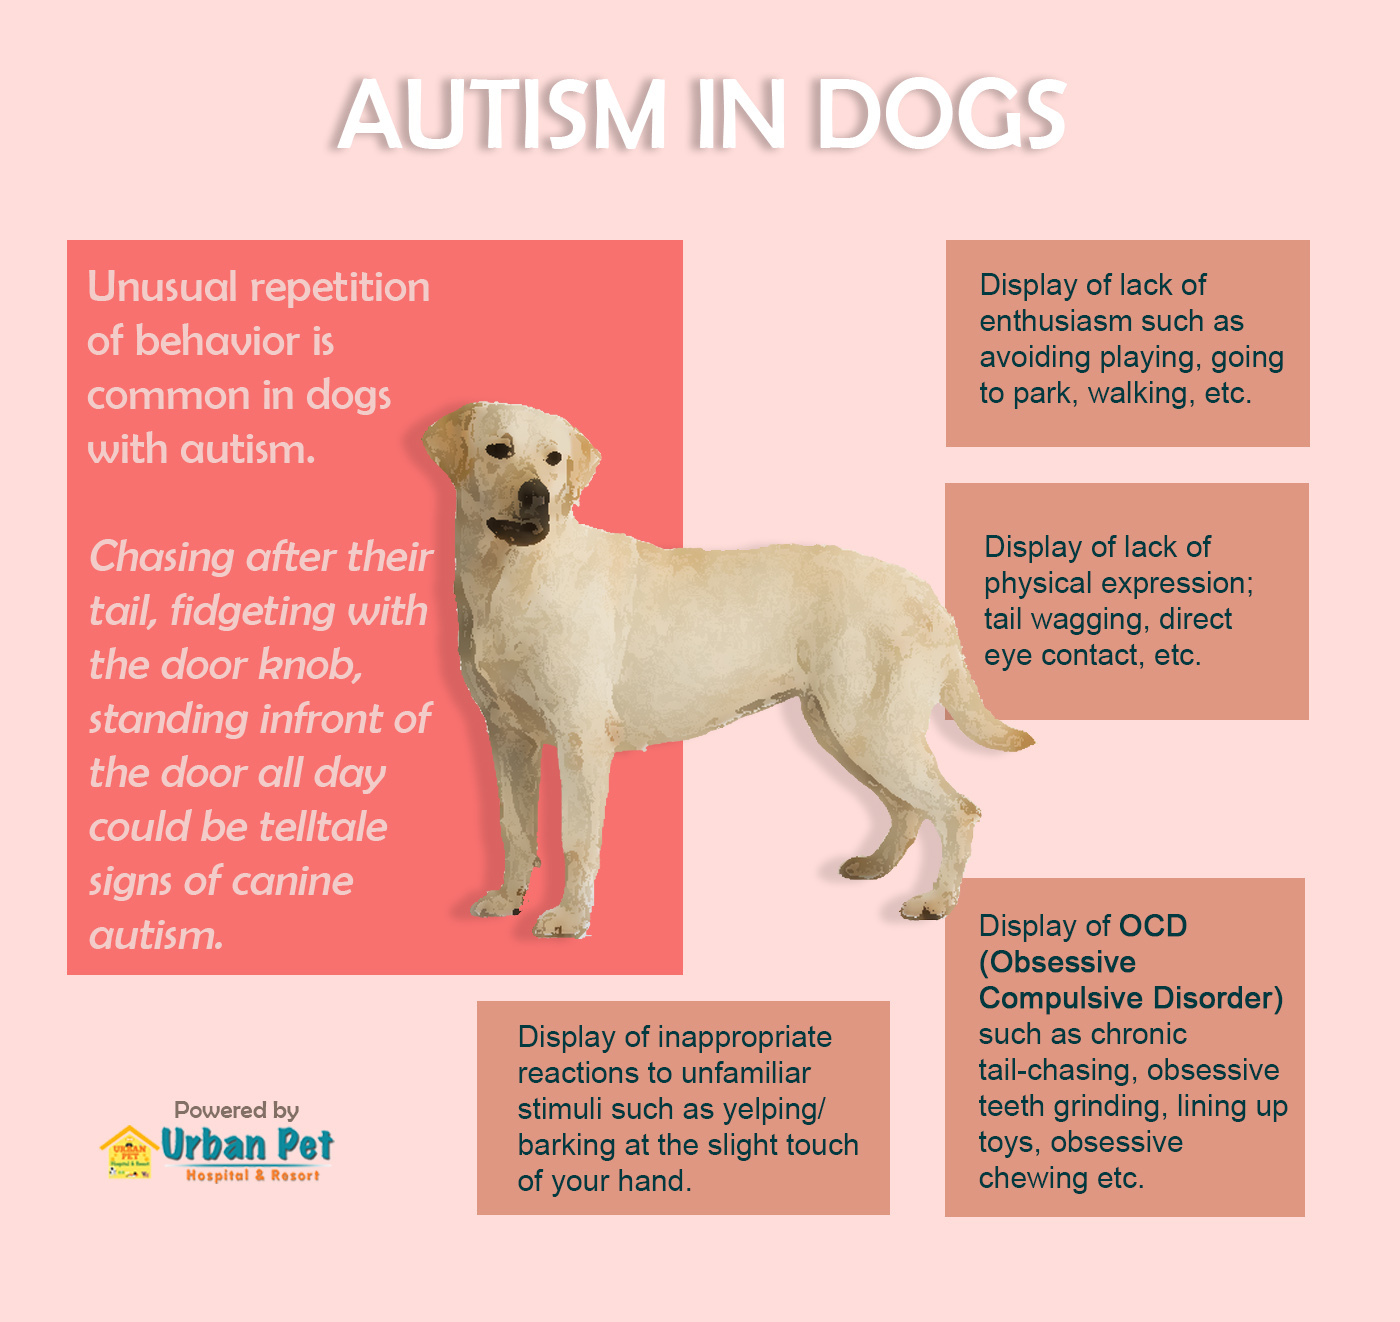 What Are The Symptoms Of Autism In Dogs